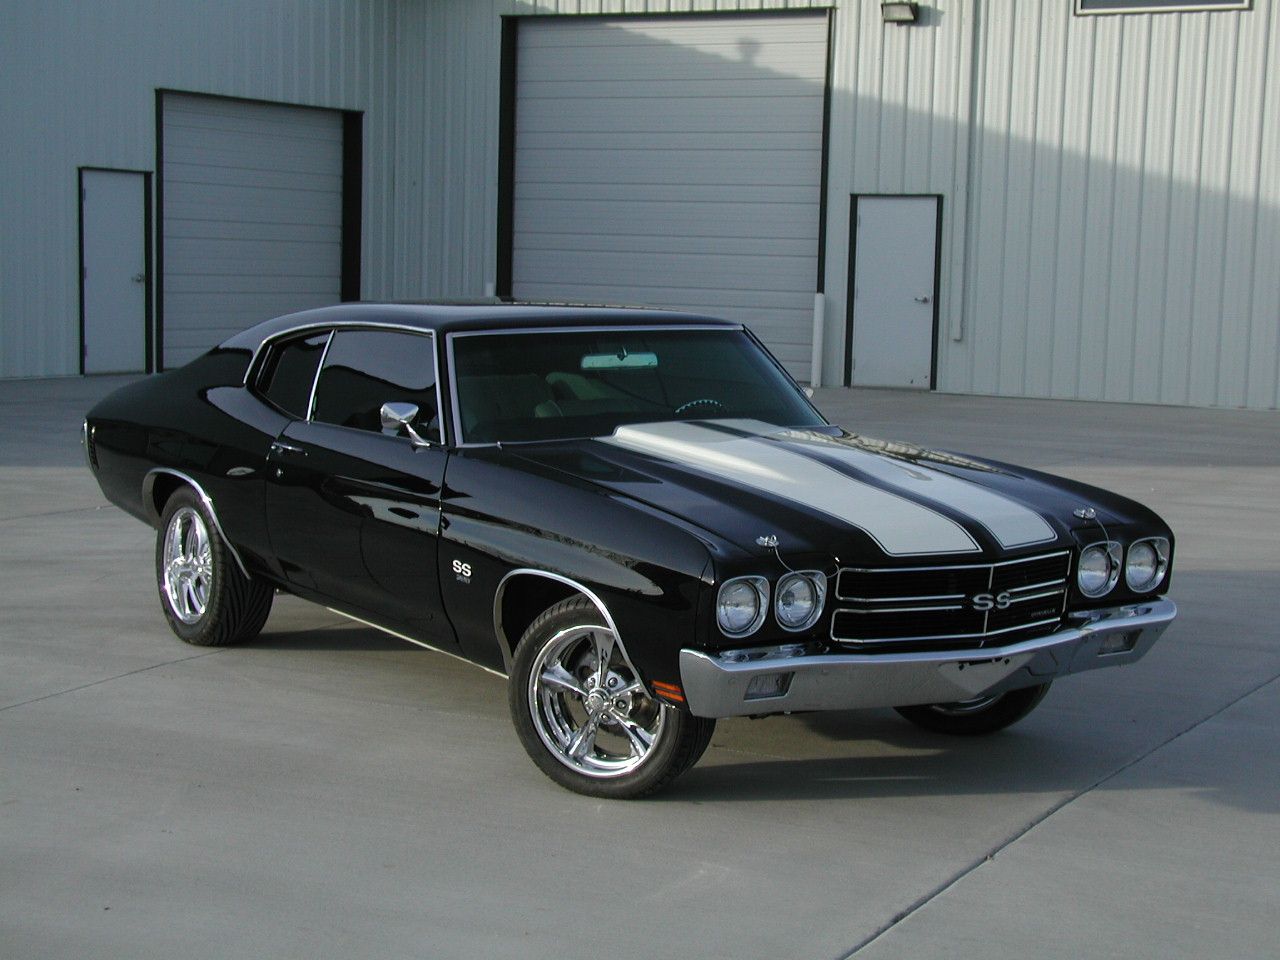 1972 Chevy Chevelle Ss -   Chevy Chevelle SS